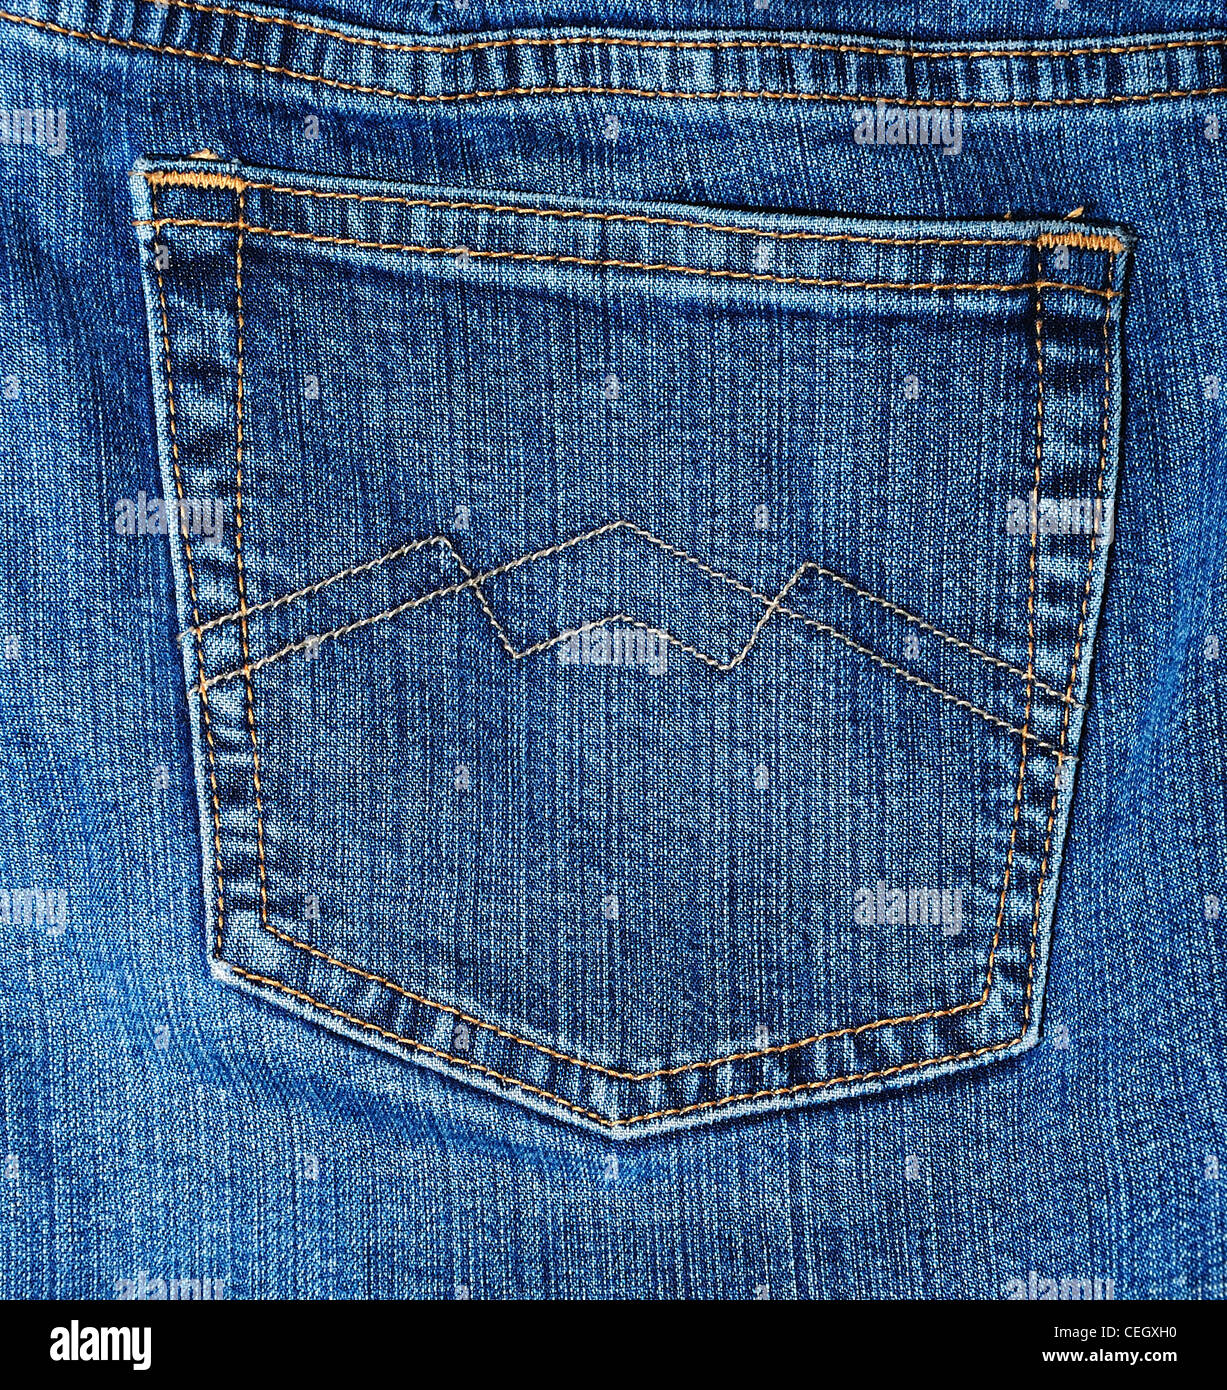 Detail image of blue jeans especially trouser pocket Stock Photo - Alamy